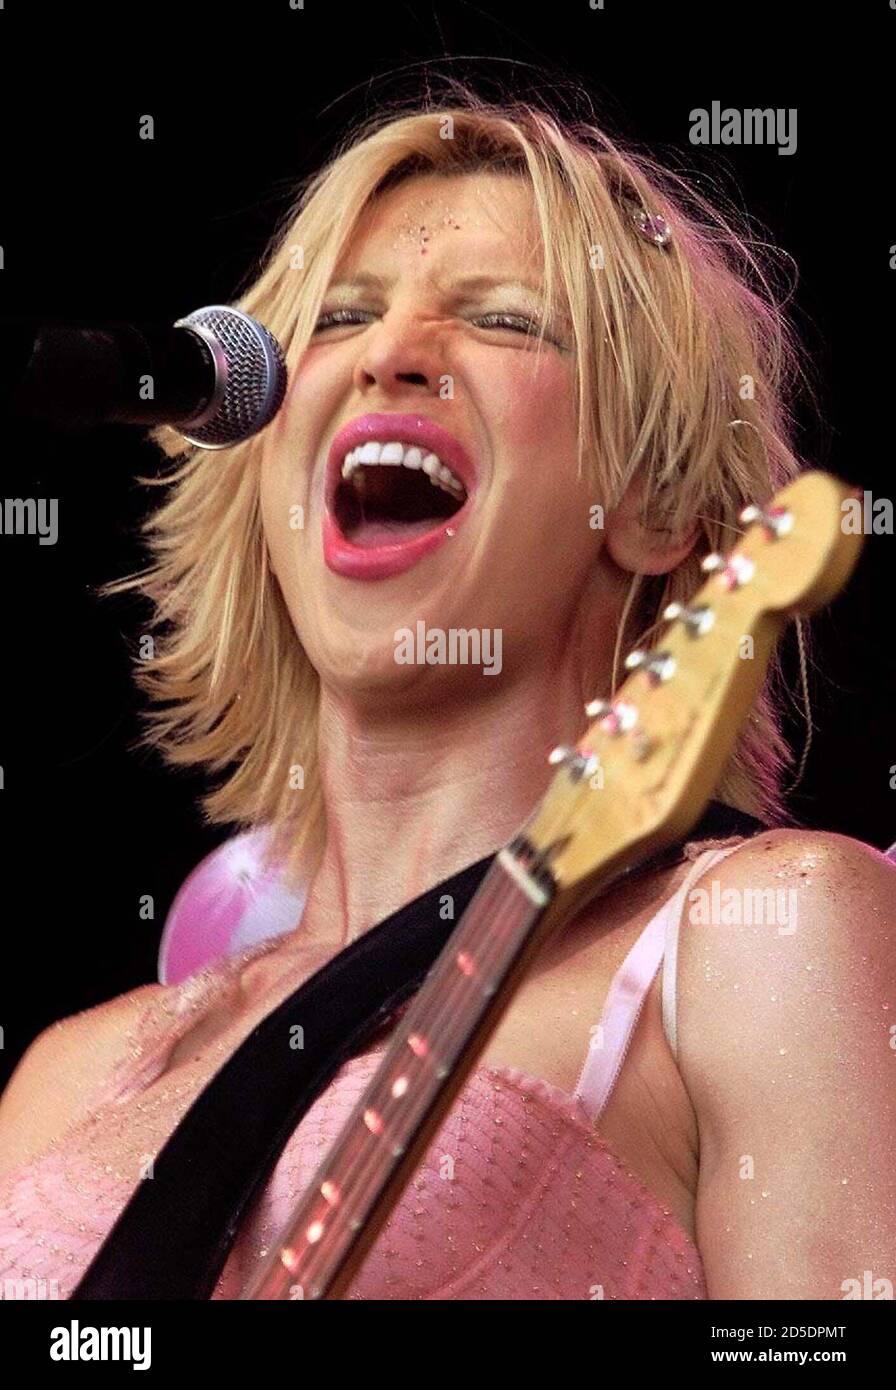 Courtney Love, the lead singer of the band Hole, performs on stage in the  sunshine at Glastonbury, June 25. The Glastonbury festival is the largest  of its kind in Europe with head